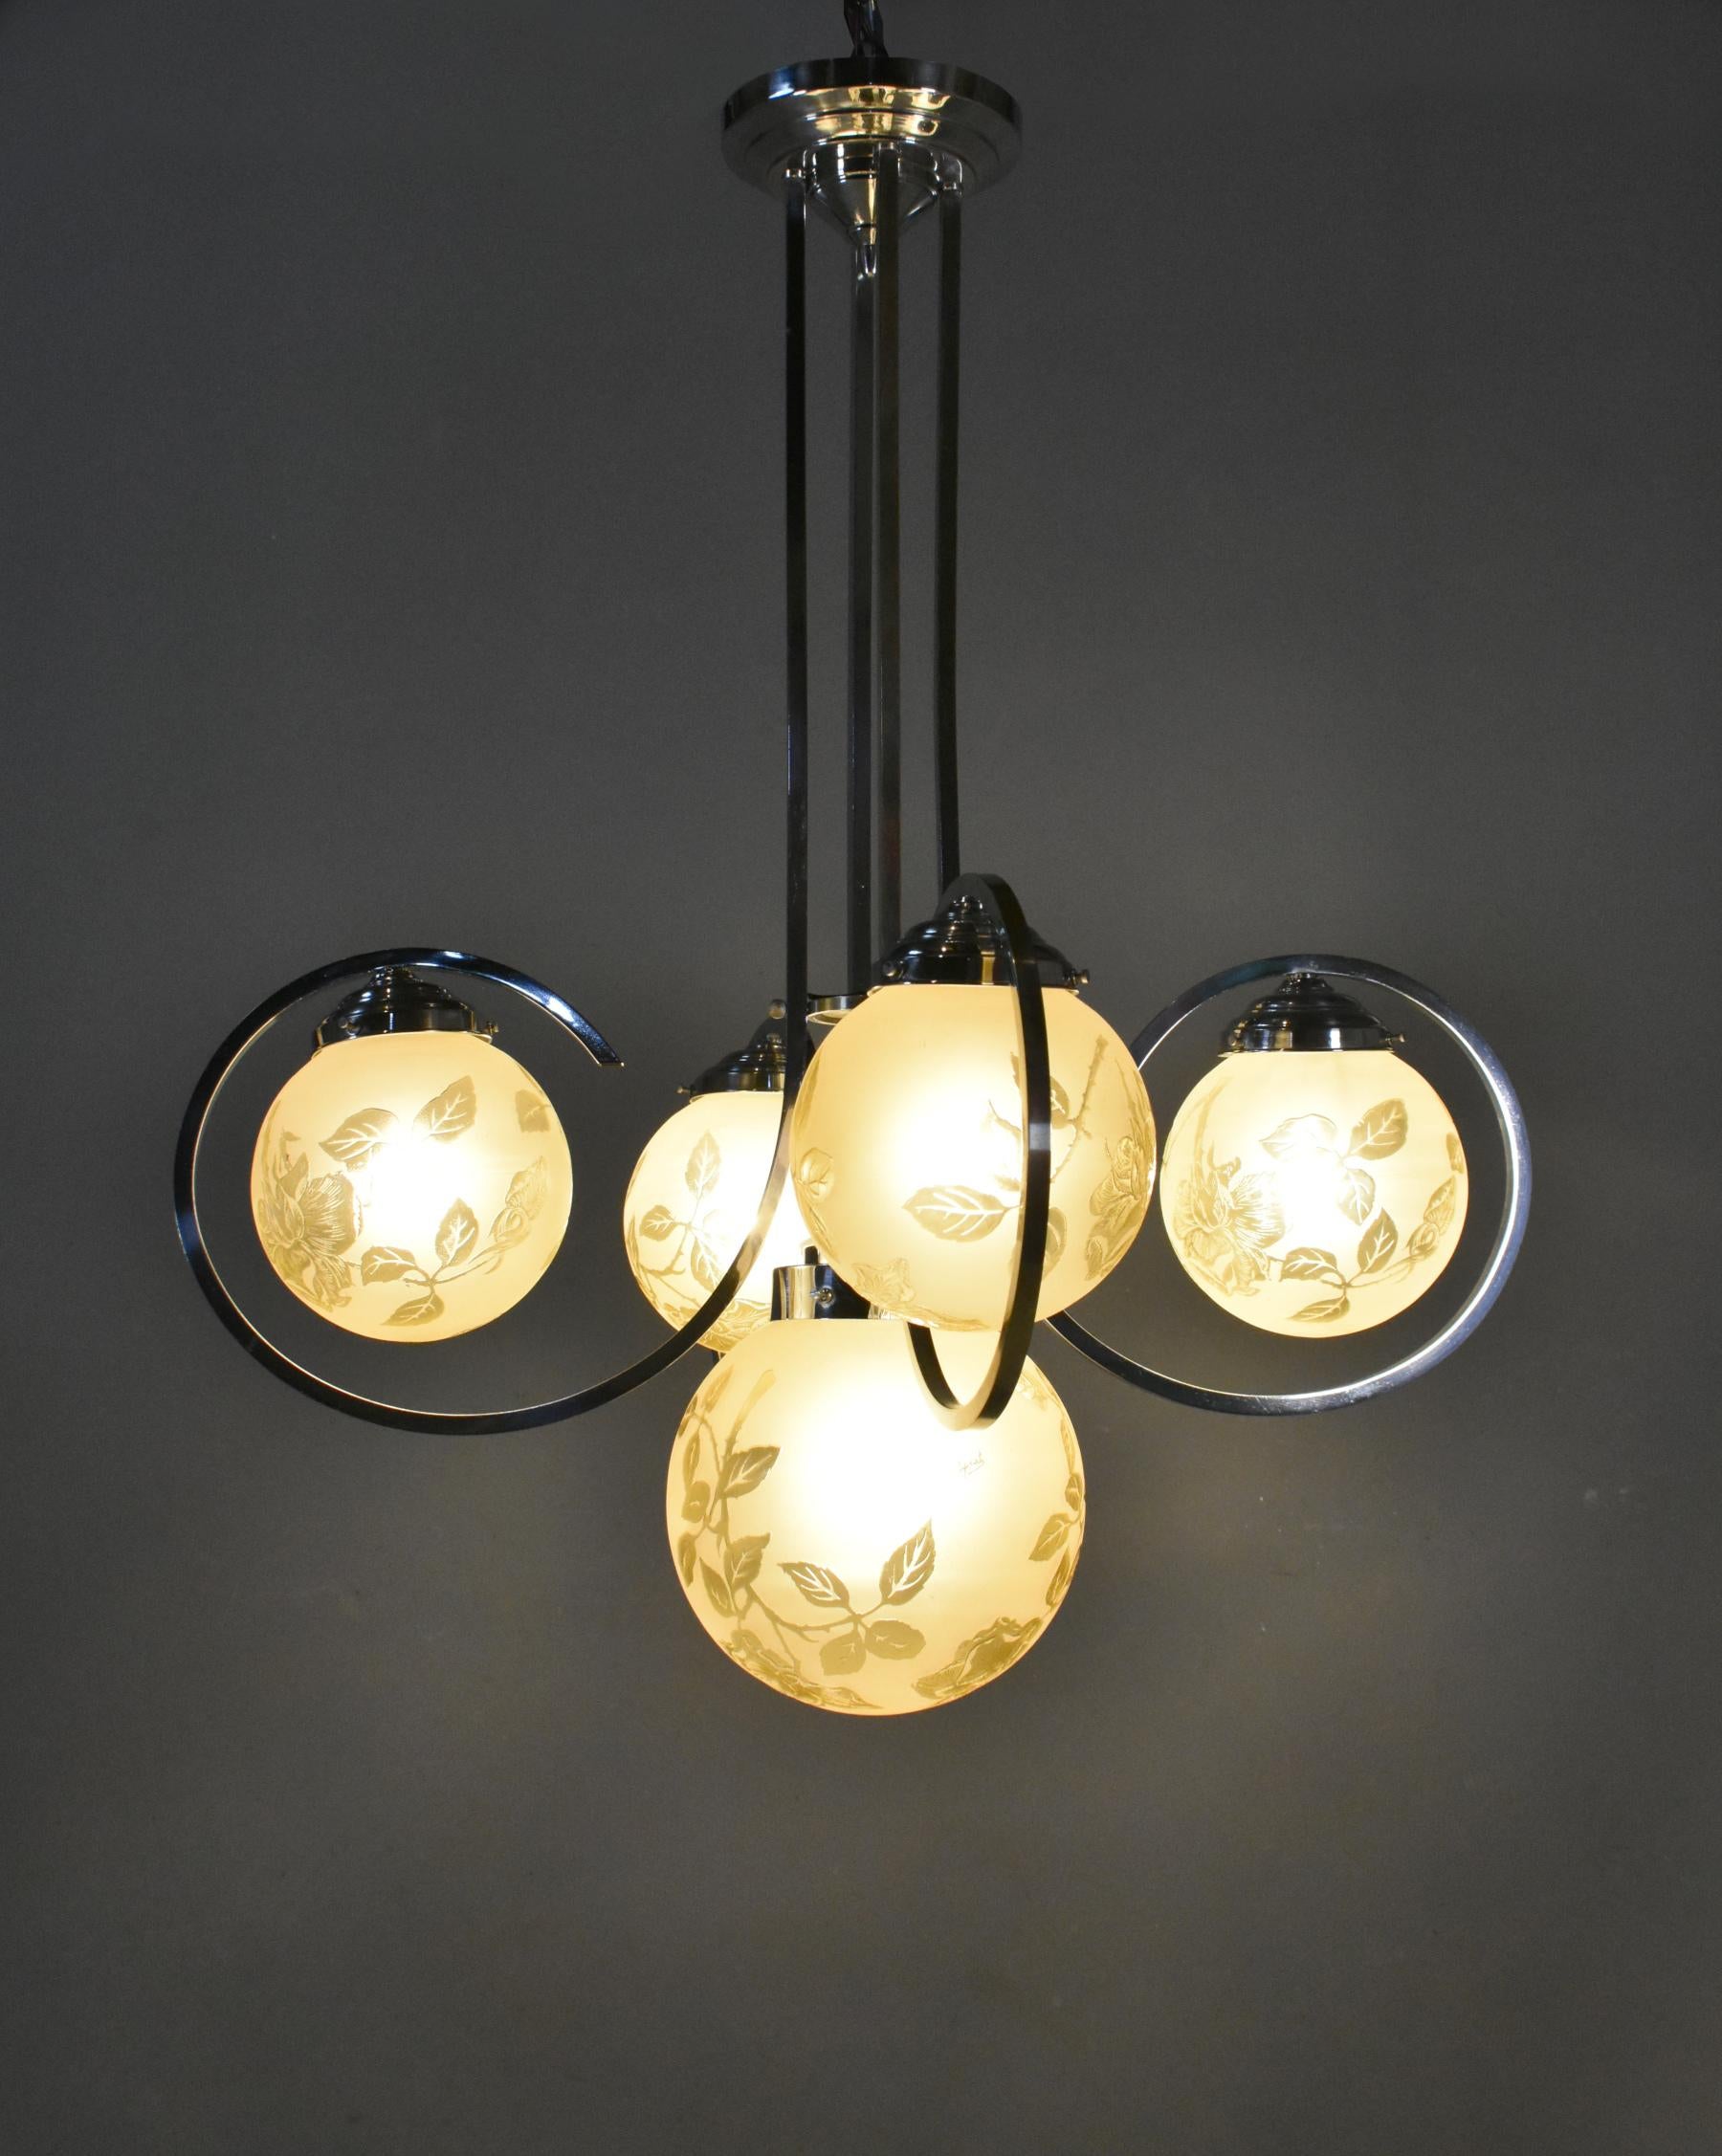 Exceptional French Art Deco chandelier light with five globes by Sprat 

A splendid chromium-plated chandelier / ceiling light features five frosted yellow globe glass light shades, each decorated with rose cuttings and signed by Sprat. 

The